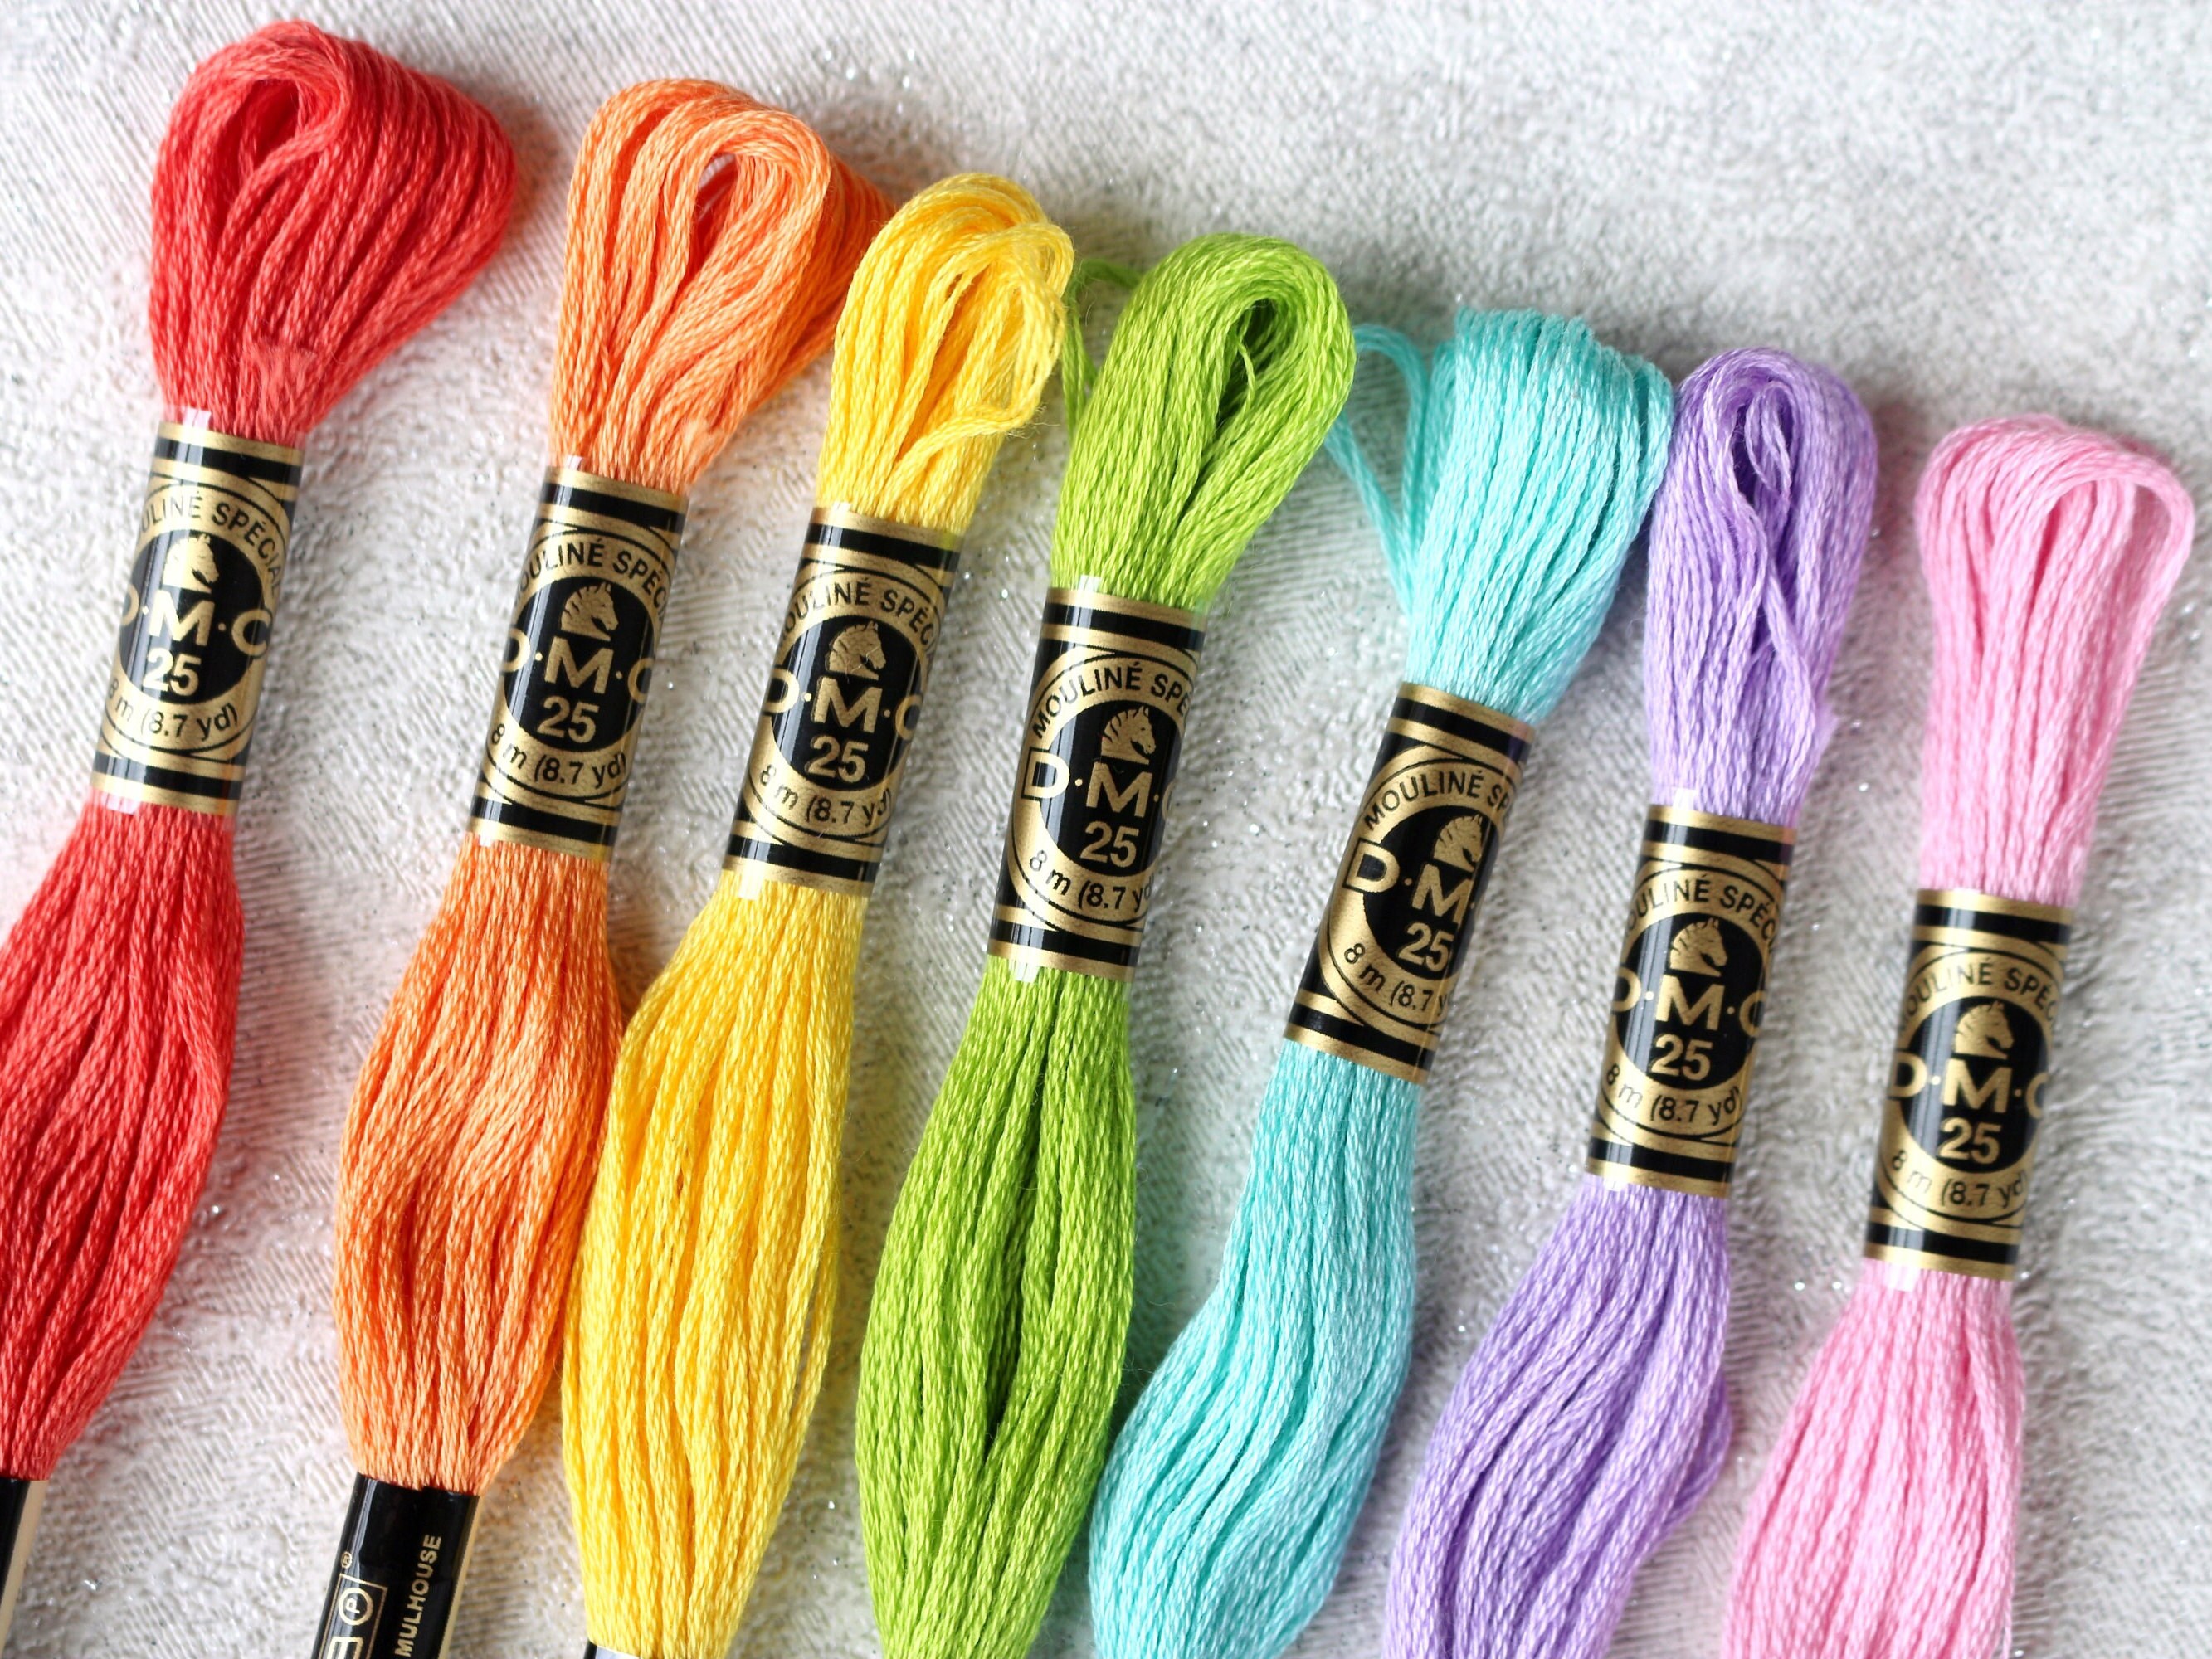 DMC Embroidery Floss Pack 8.7yd Limited Edition 27/Pkg